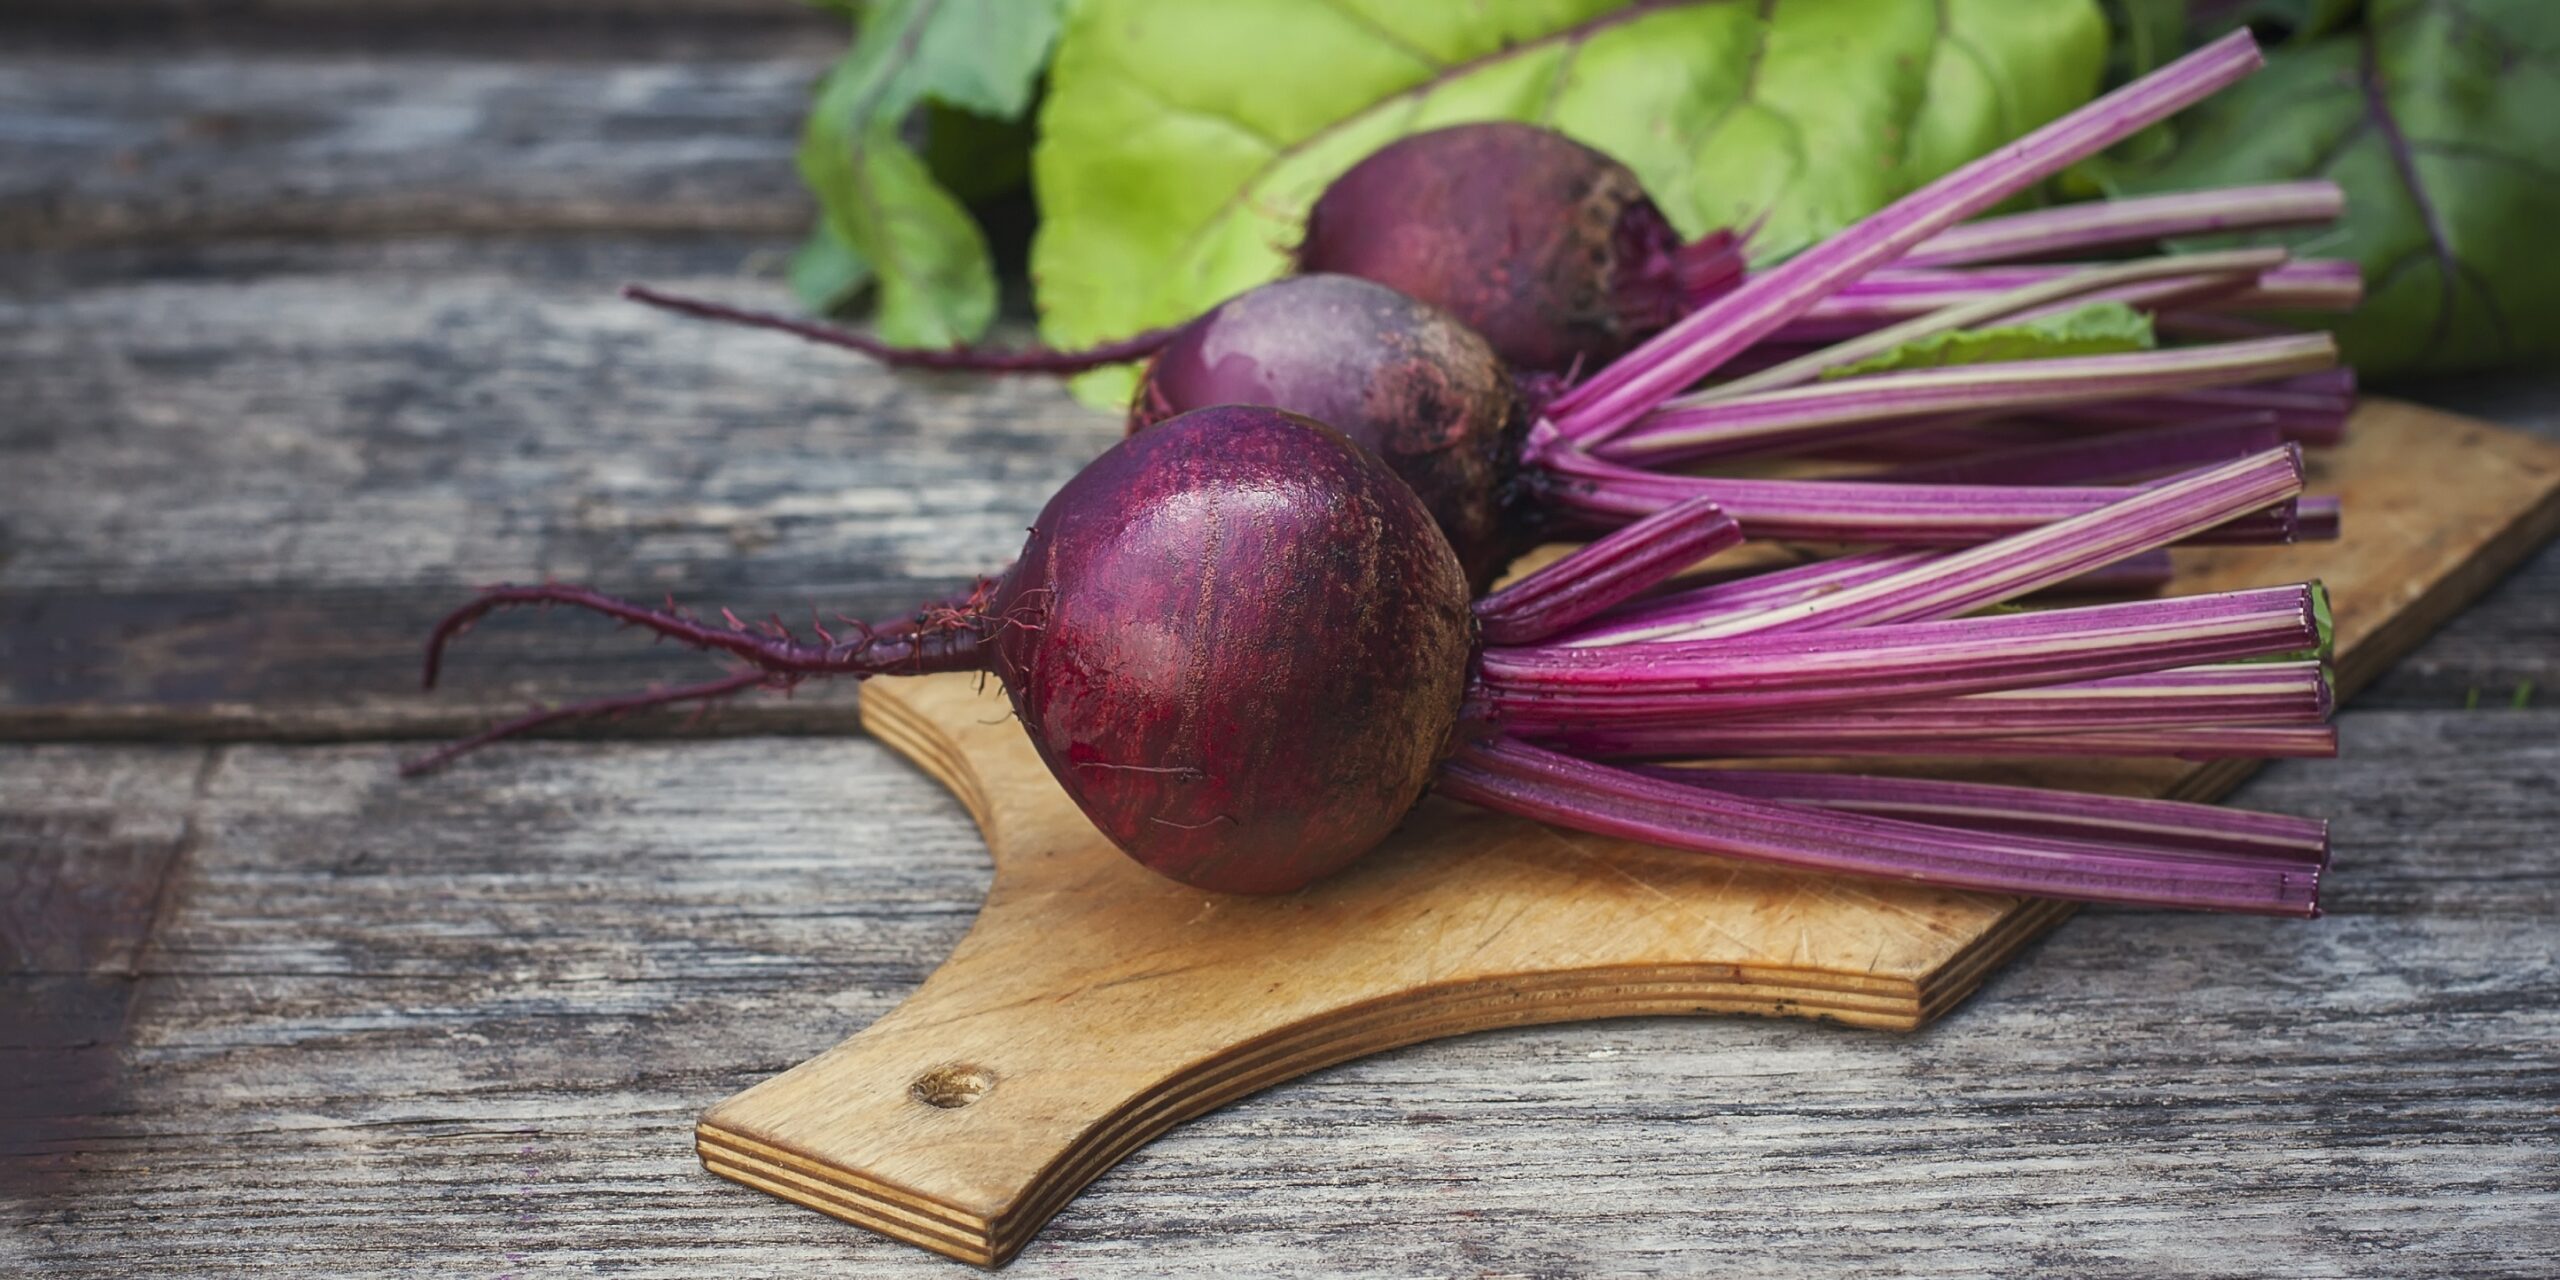 Beetroot promotes digestion and supports blood formation